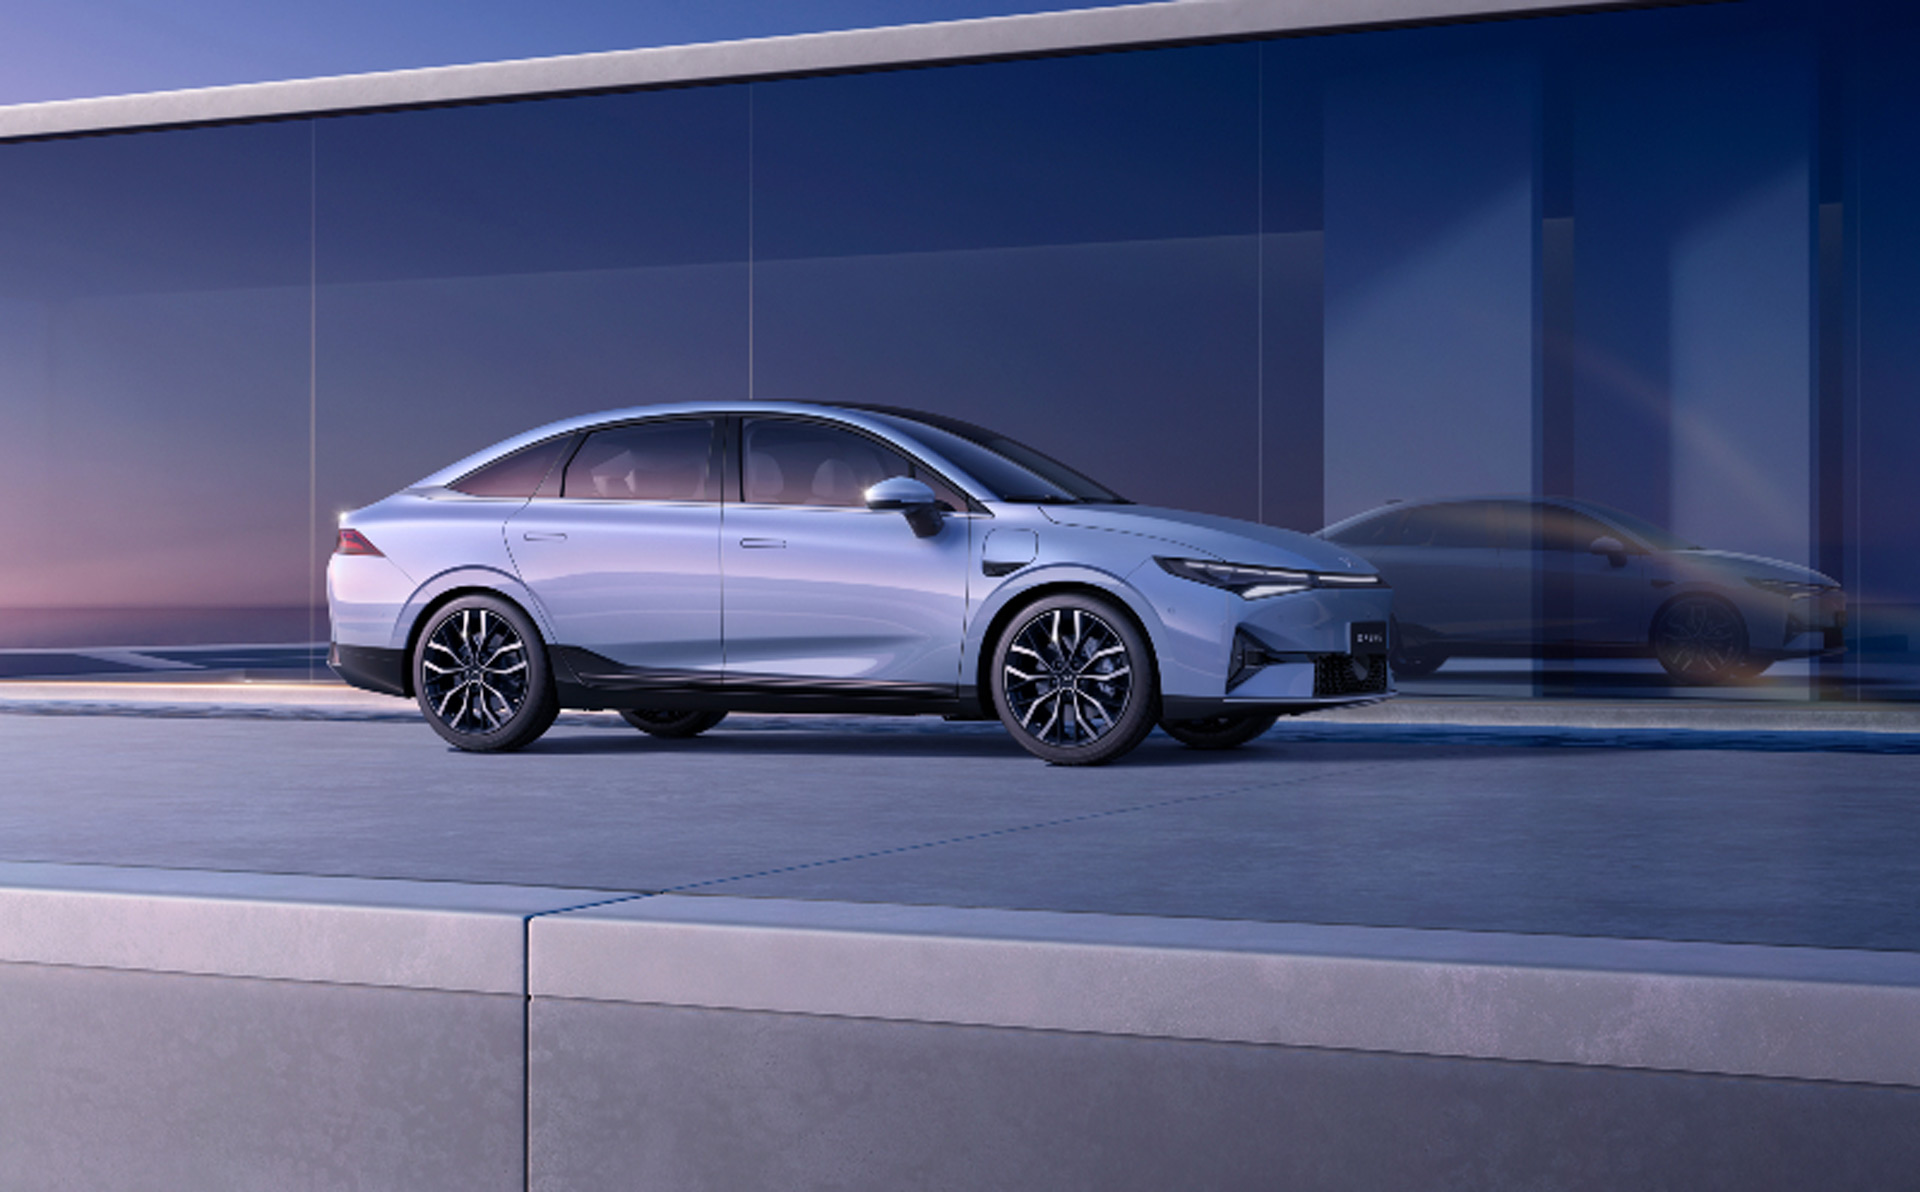 Xpeng P5 electric sedan starts around $25,000, leads in driver-assistance tech, aims for EuropeXpeng P5 electric sedan starts around $25,000, leads in driver-assistance tech, aims for Europe